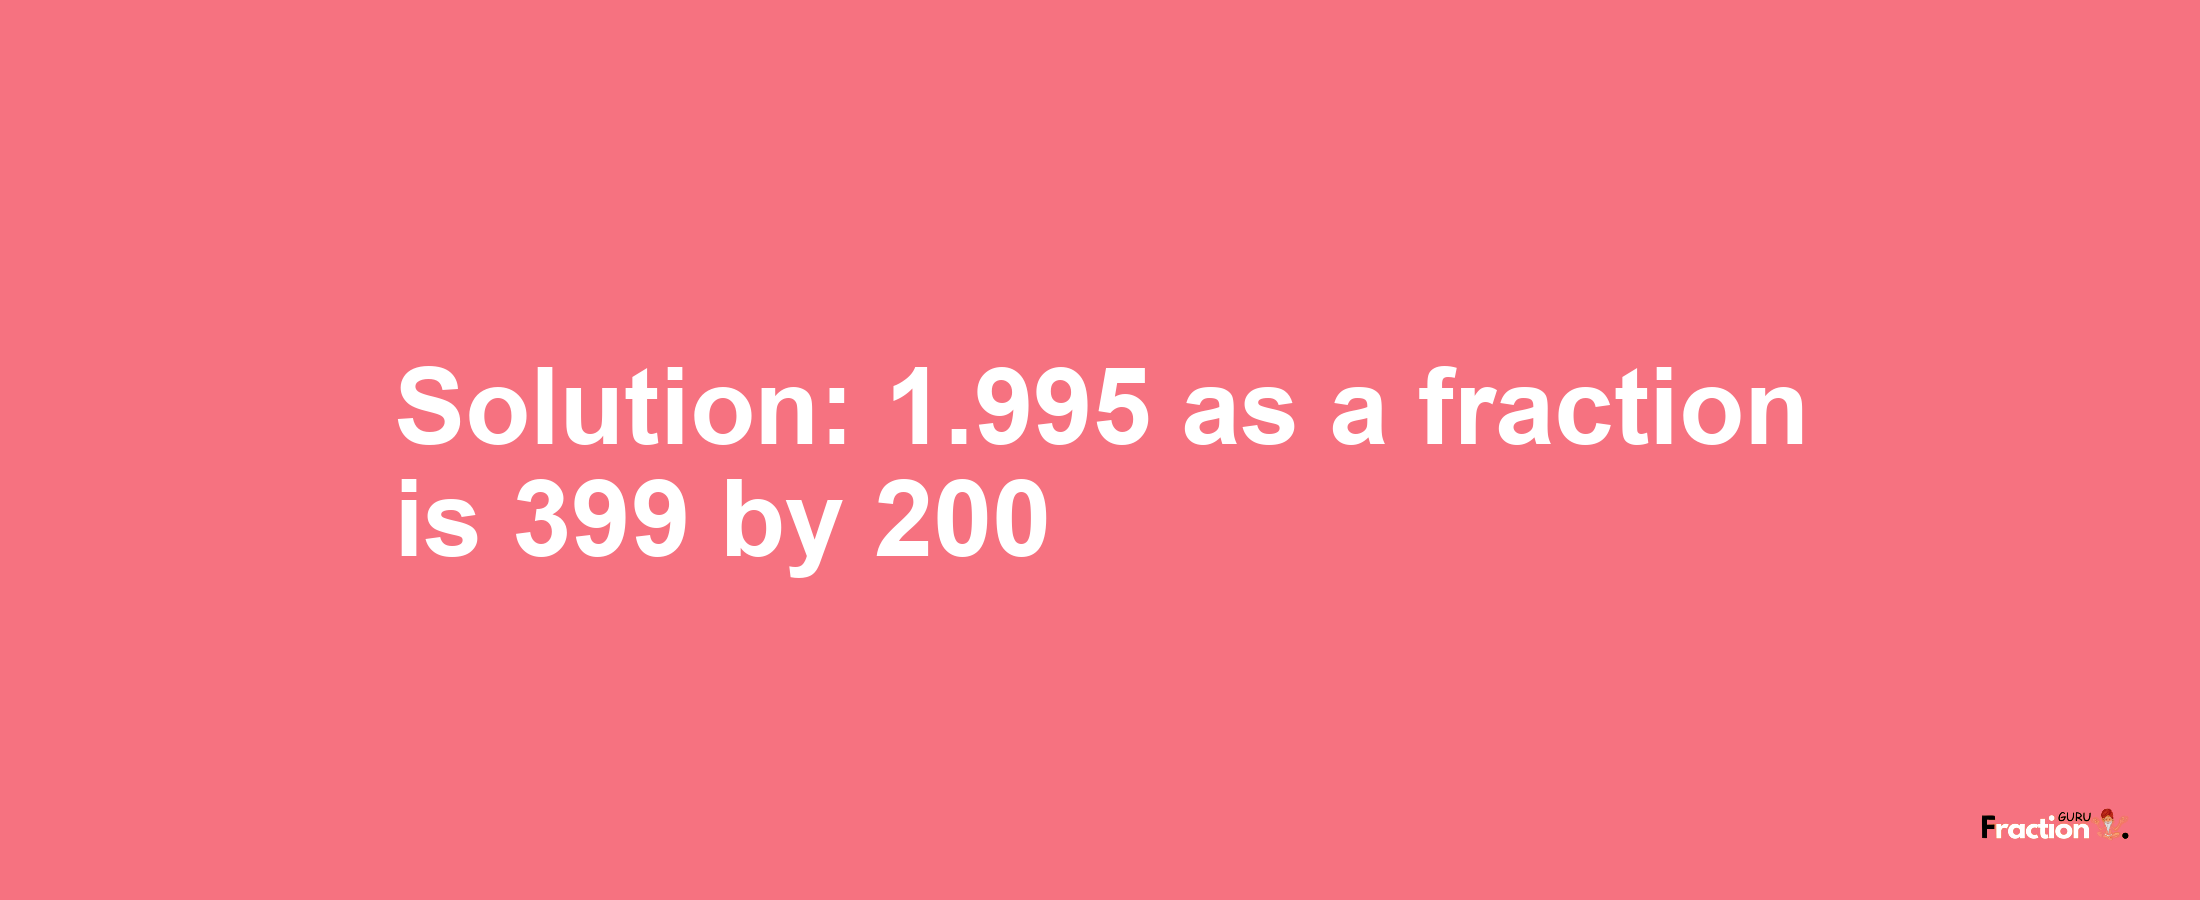 Solution:1.995 as a fraction is 399/200